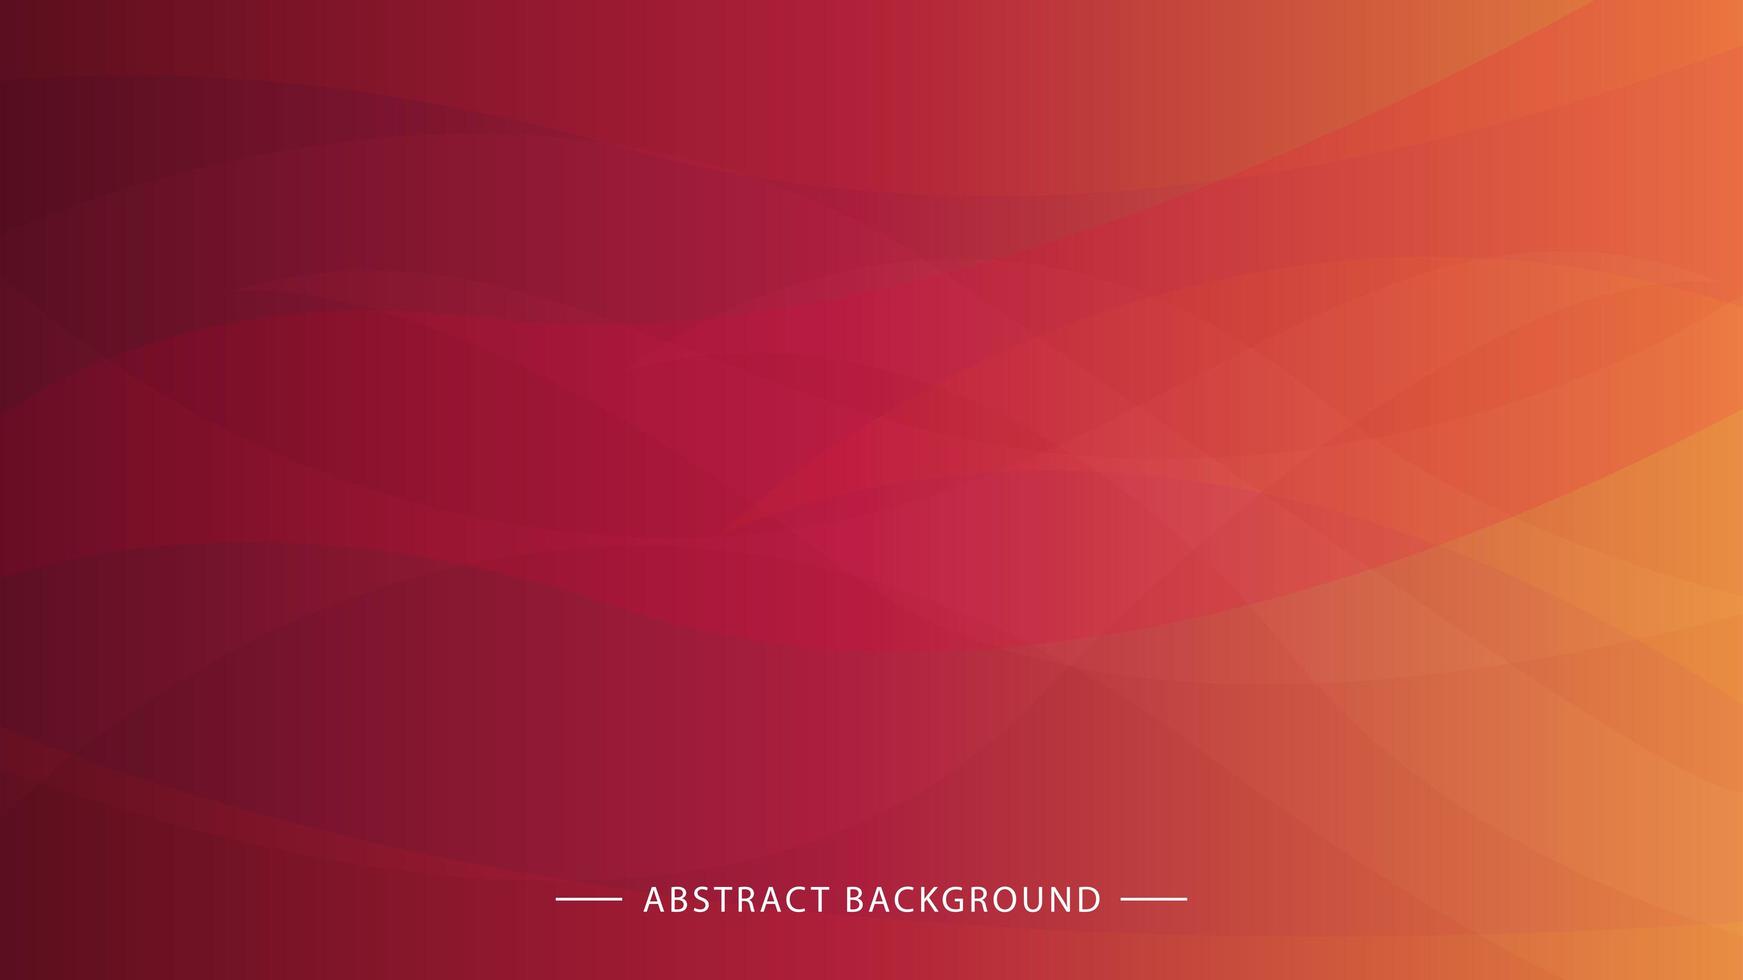 Red and orange design with smooth intersecting lines vector